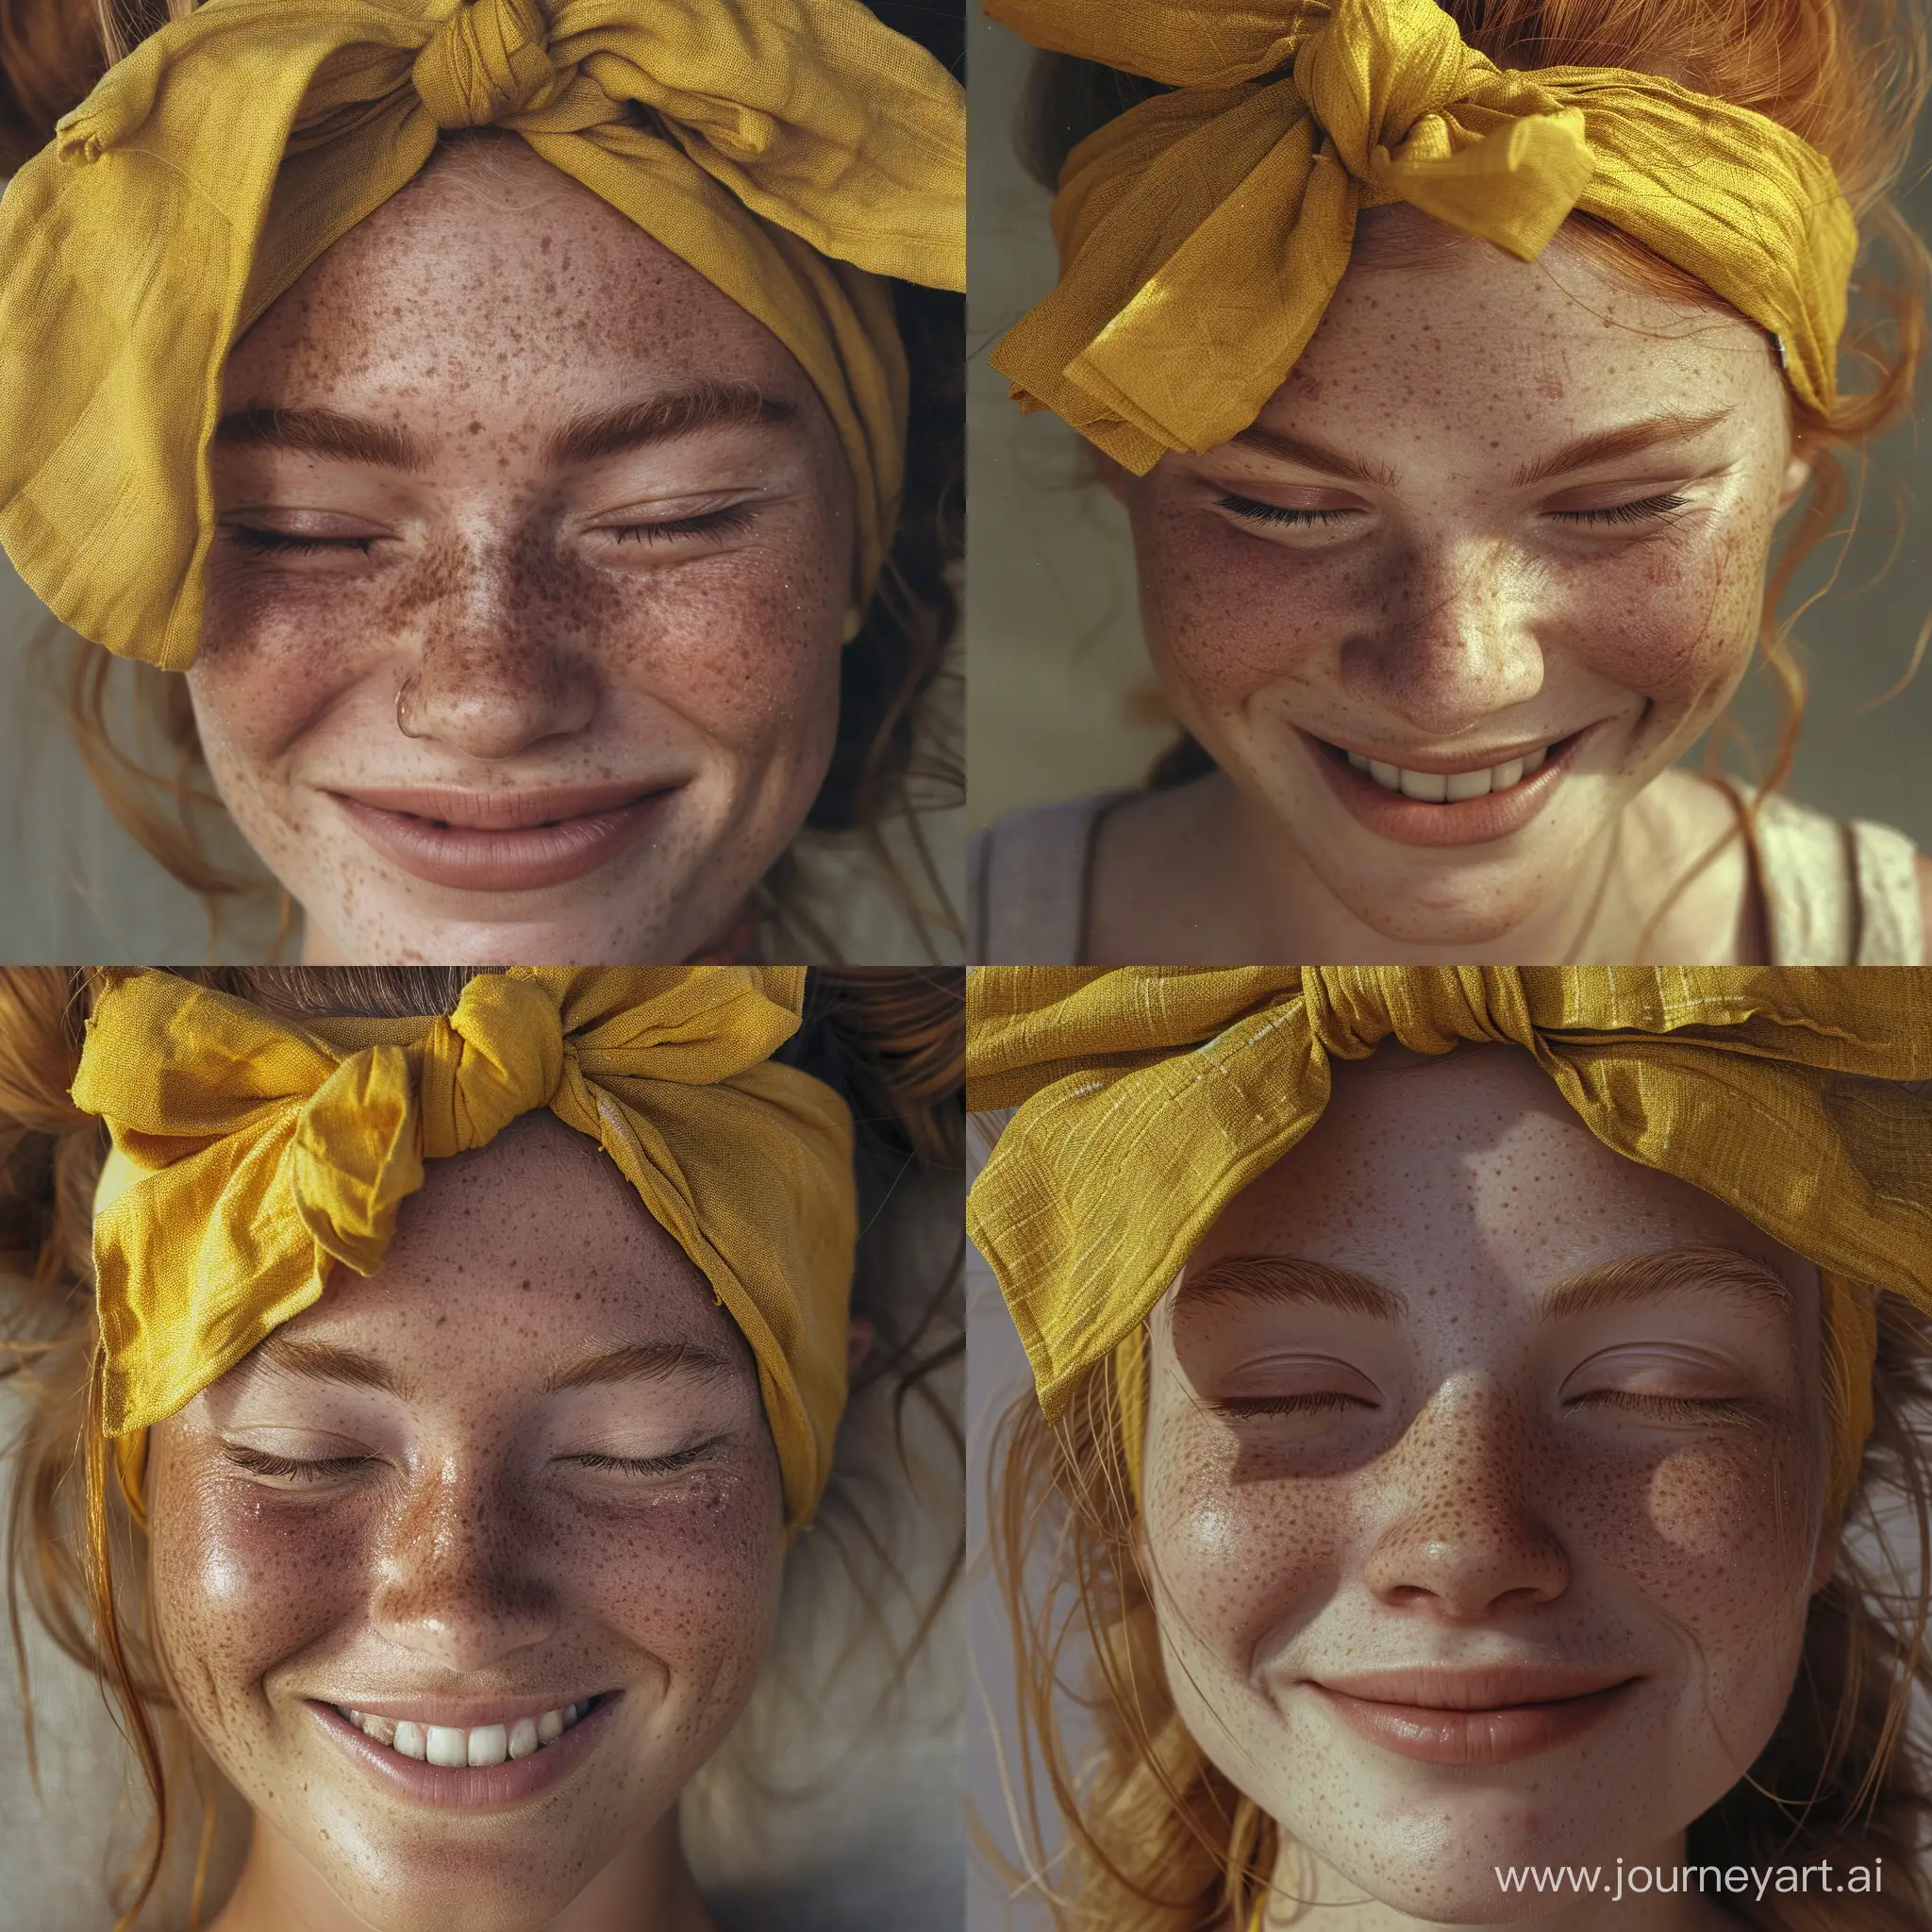 high-resolution, close-up image of a  a young woman with light skin. Her hair is tied up with a yellow headband that has a bow on the top. She has visible freckles across her face, which add to her cheerful expression. The woman has her eyes closed tightly as she smiles, indicating a moment of genuine joy or amusement. The tight closure of her eyes has caused wrinkles or "crow's feet" to appear at the outer edges, which is common in such expressions.

